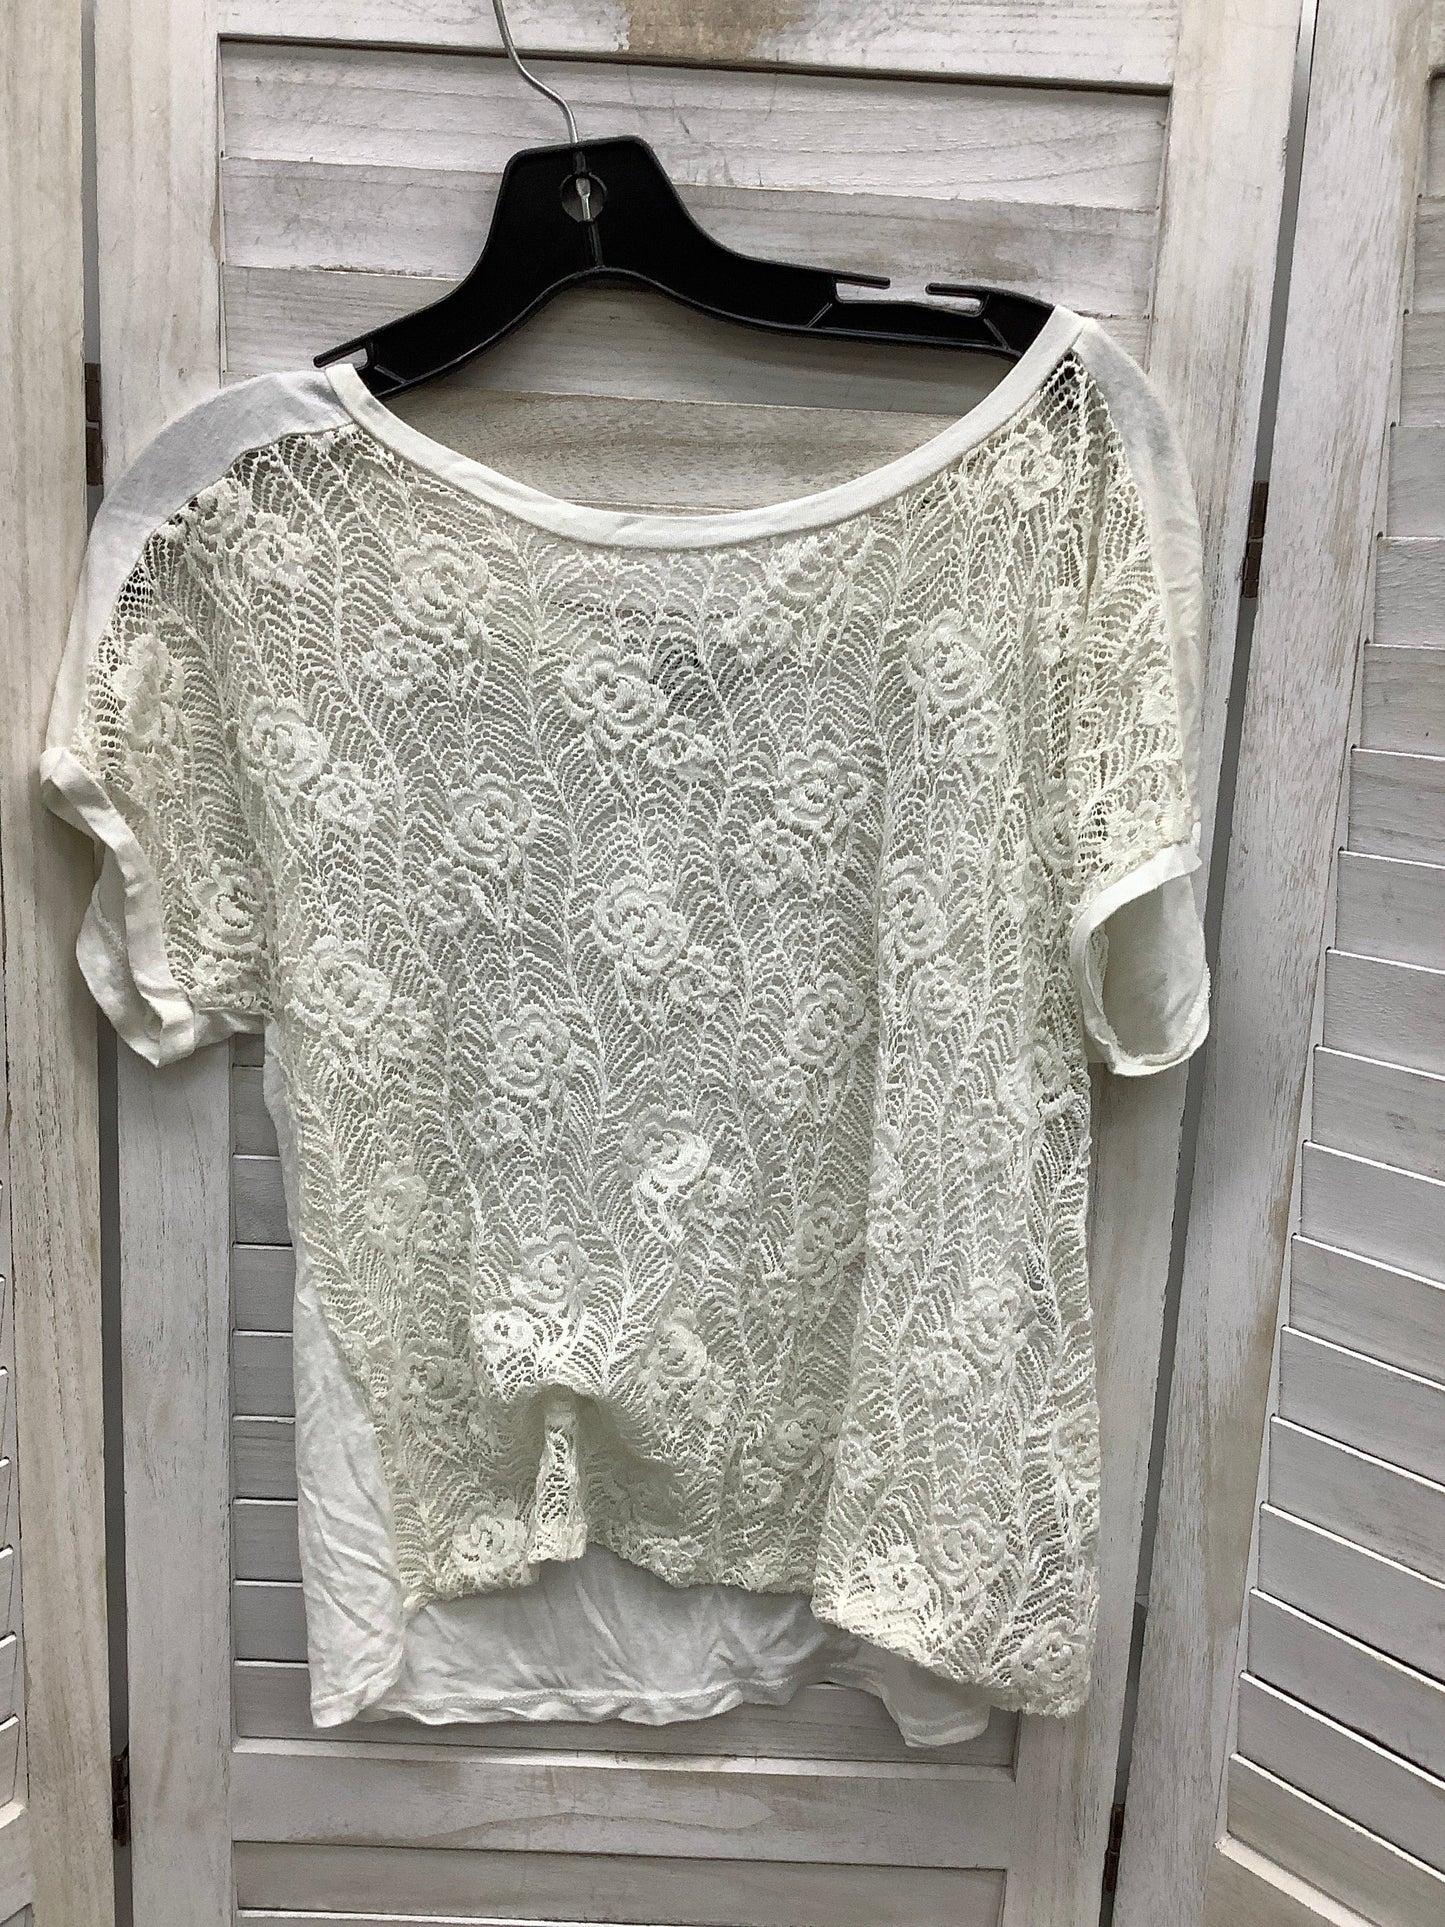 Top Short Sleeve Basic By Clothes Mentor  Size: L